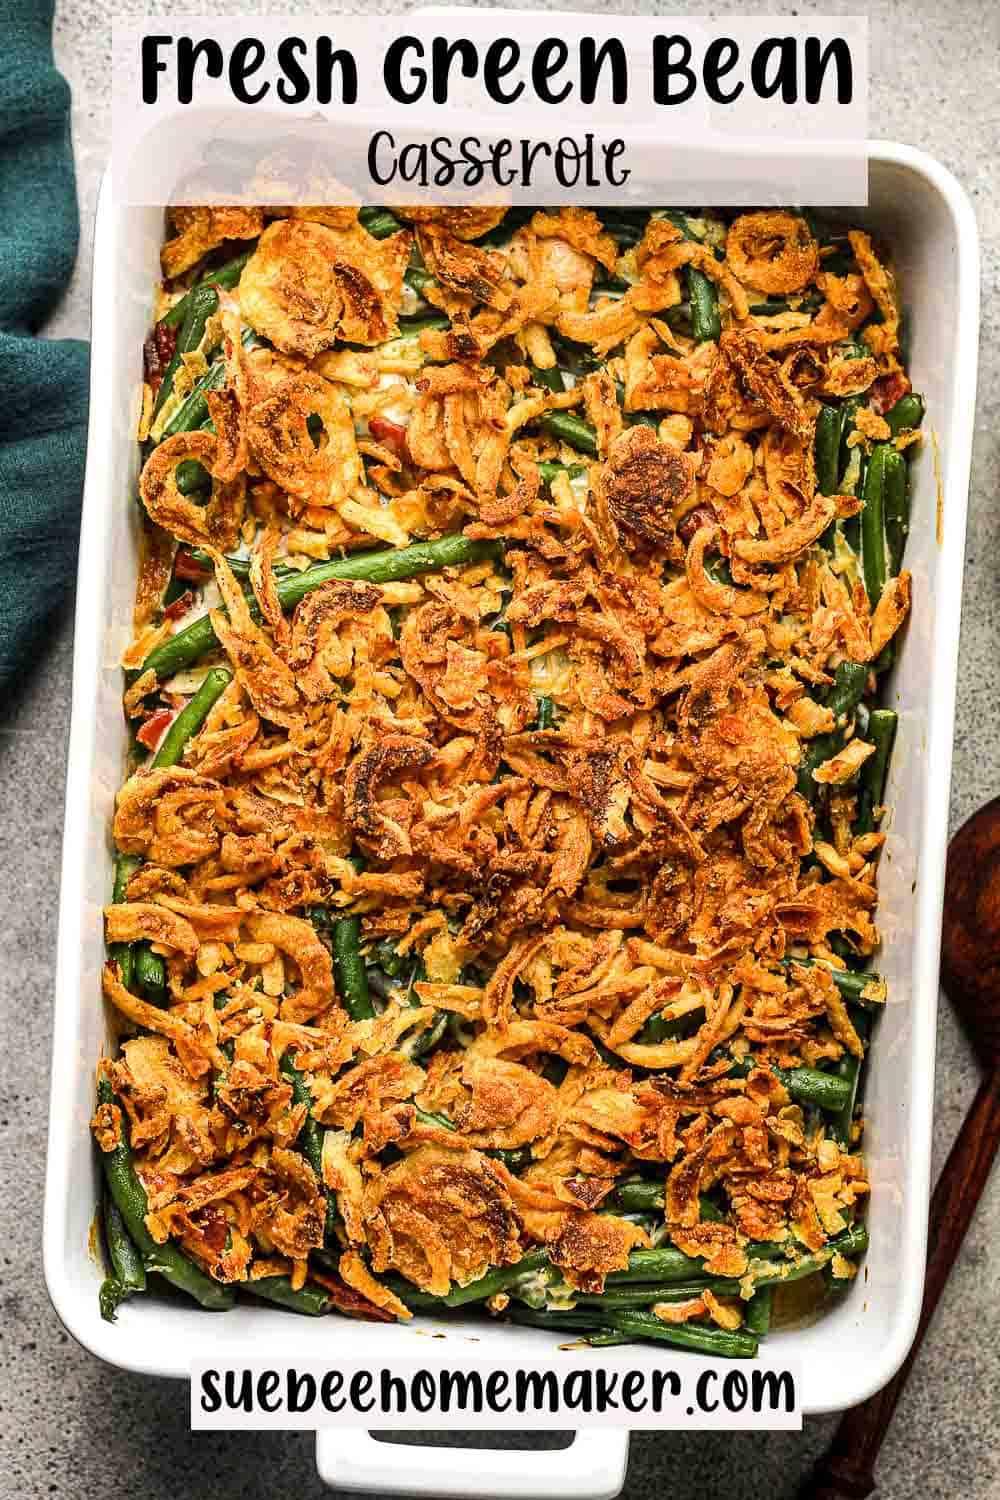 A large 9x13 pan of green bean casserole with fresh green beans.